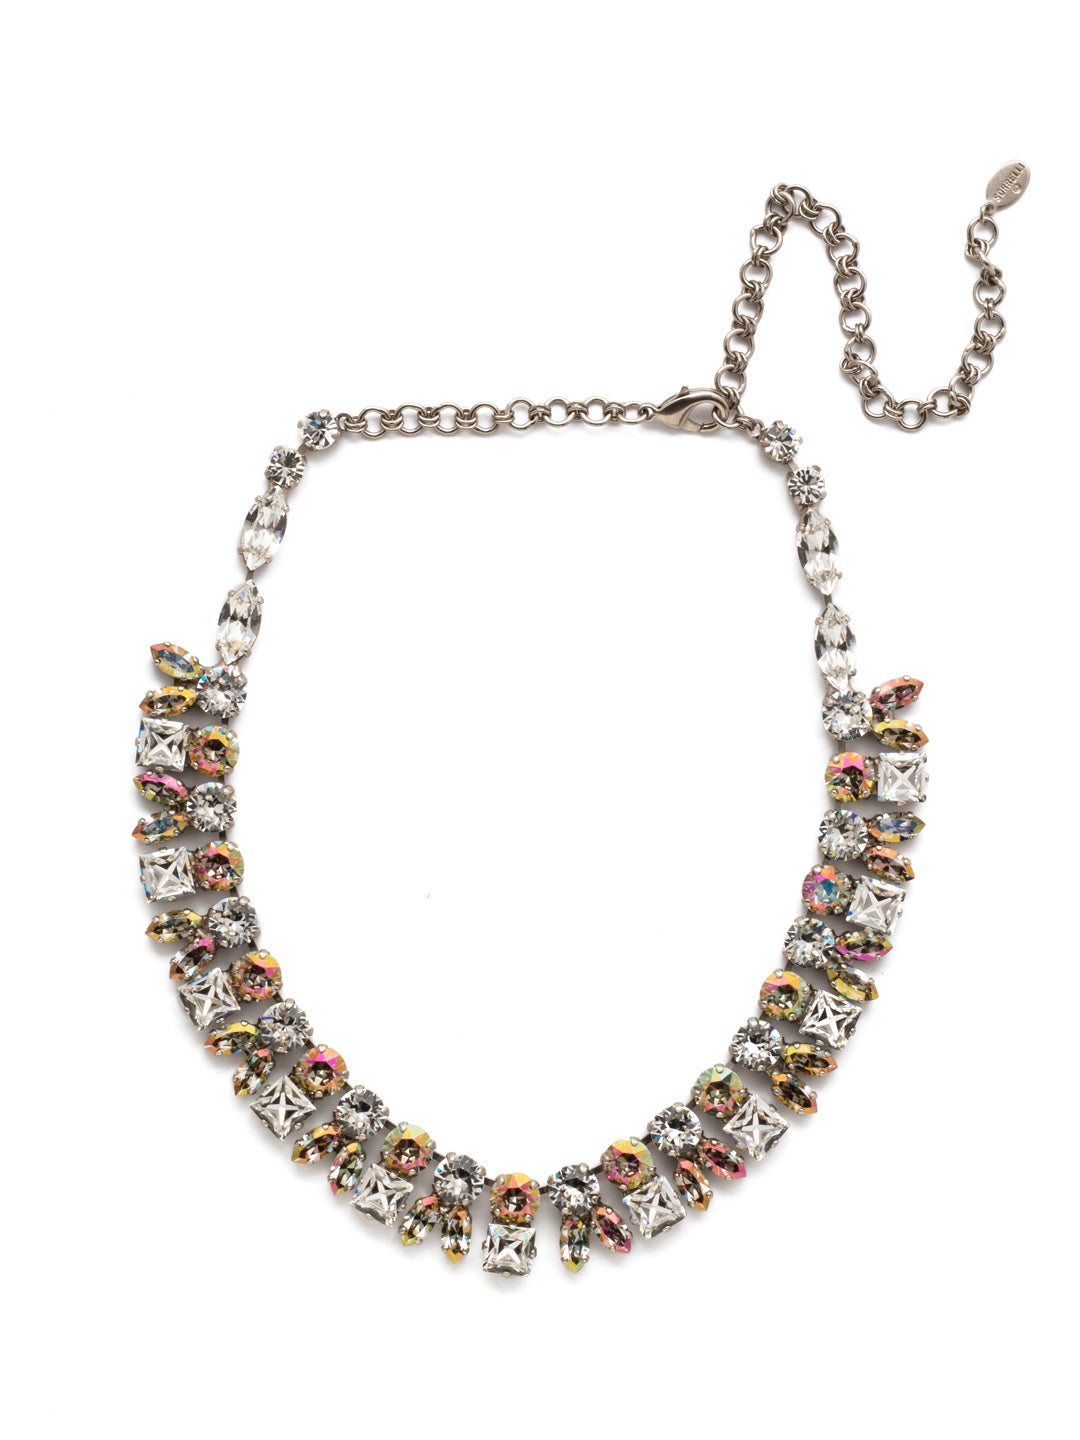 Paola Statement Necklace - NEP20ASCRE - <p>One layer of sparkling crystals not enough? We've got you covered with the Paola Statement Necklace. Fasten it on to your desired lenth and sparkle in round, antique and navette crystals galore. From Sorrelli's Crystal Envy collection in our Antique Silver-tone finish.</p>